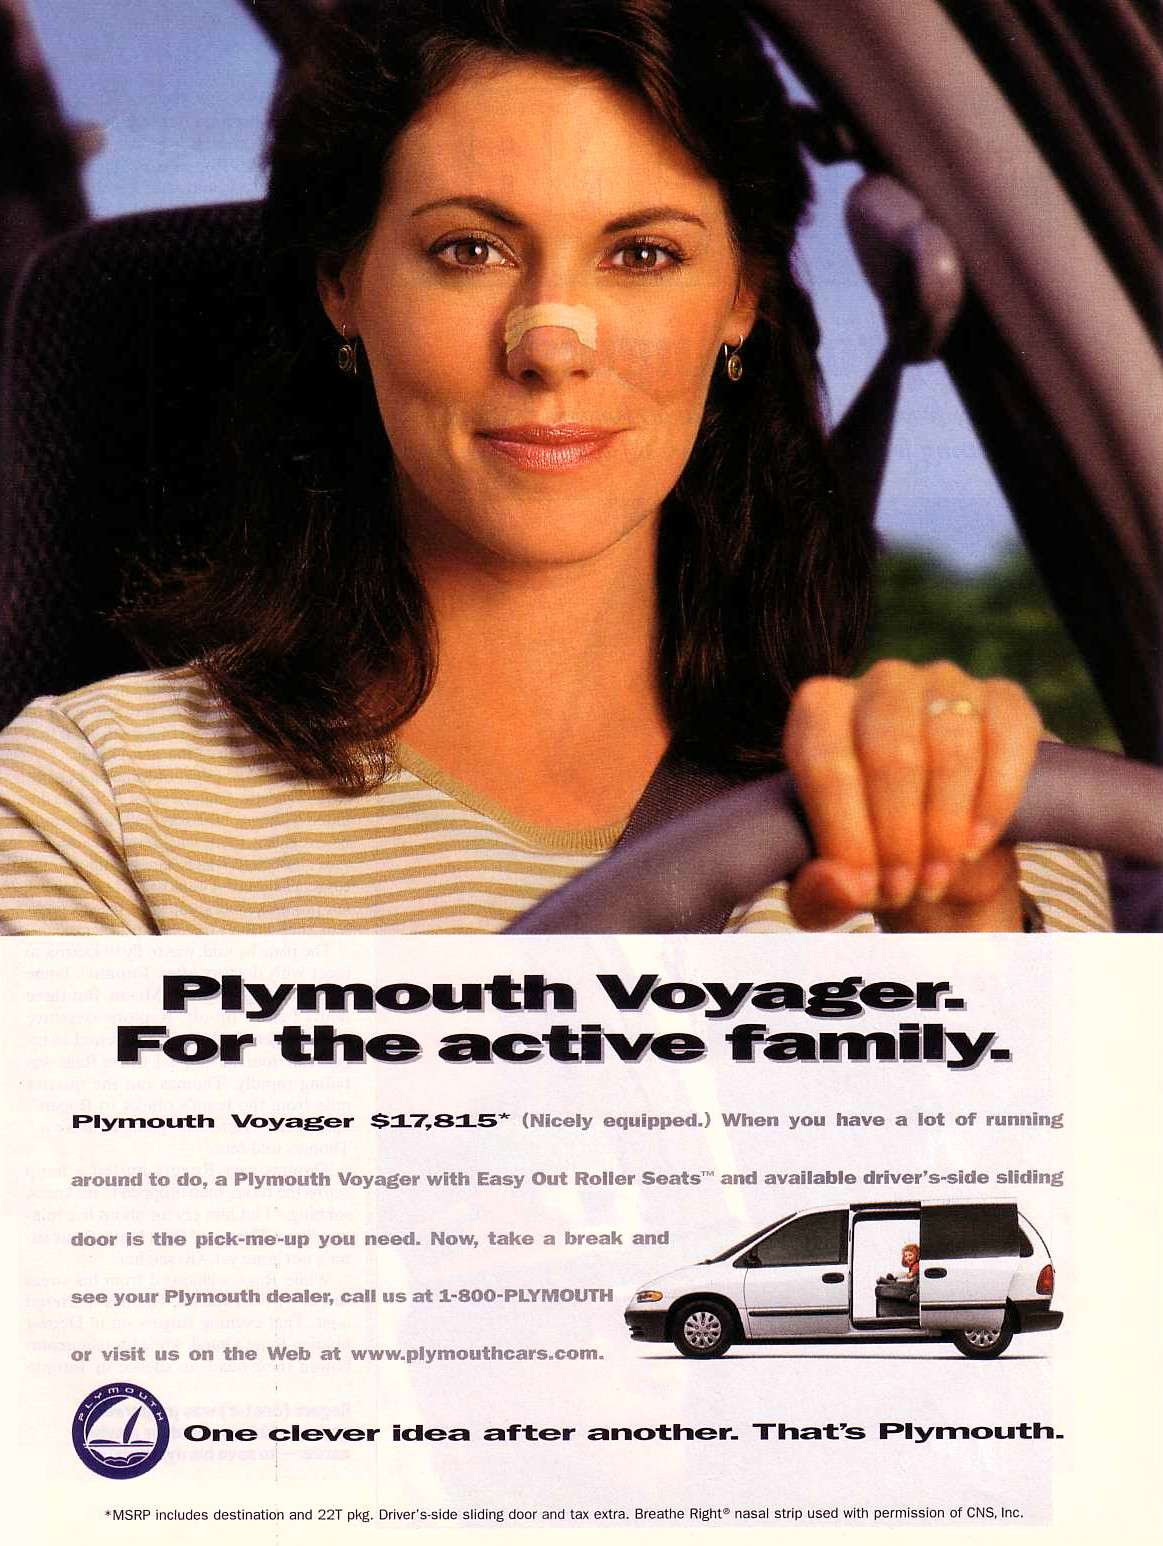 Plymouth Voyager. For the active family. Plymouth Voyager $17,815 (nicely equipped). When you have a lot of running around to do, a Plymouth Voyager with Easy Out Roller Seats and available driver's-side sliding door is the pick-me-up you need. Now, take a break and see your Plymouth dealer, call us at 1-800-PLYMOUTH ffED or visit us on the Web at www.plymouthcars.com. One clever idea after another. That's Plymouth.